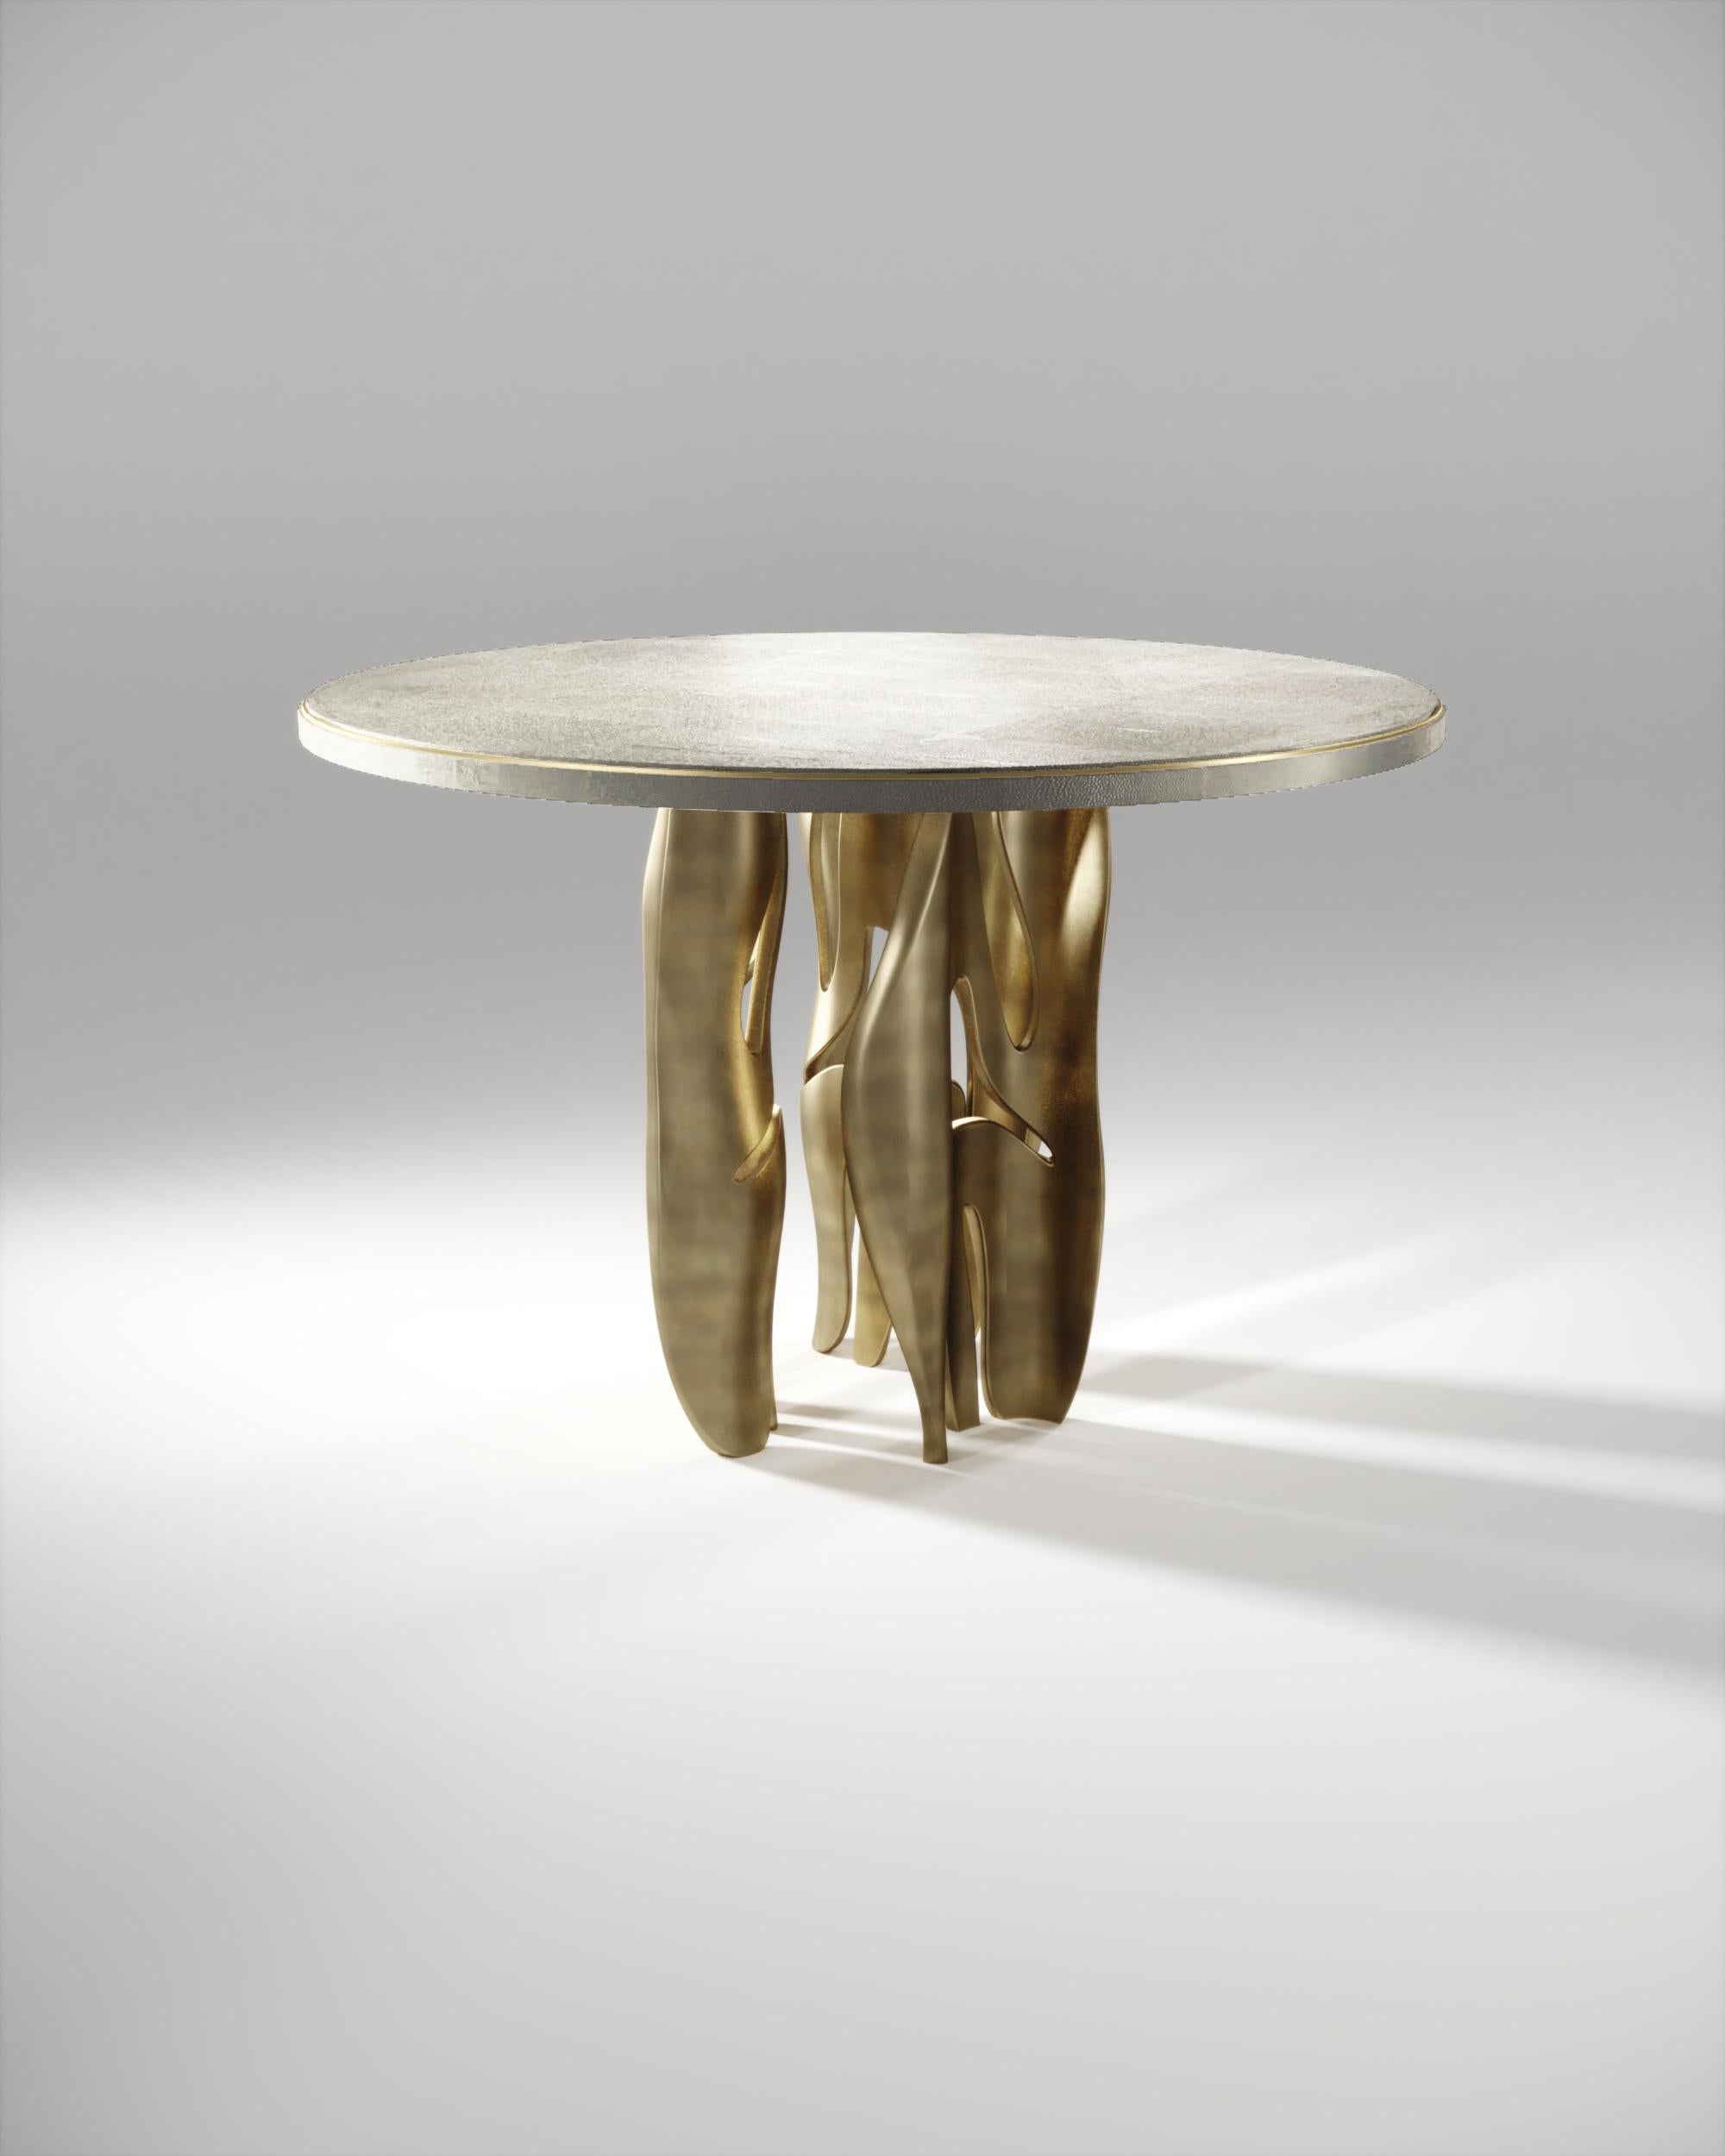 The Metropolis II breakfast table by R&Y Augousti is a statement piece. The round-shaped cream shagreen inlaid top, with a discrete metal indentation, sits on a cluster of dramatic sculptural bronze-patina brass legs, showcasing the brand's